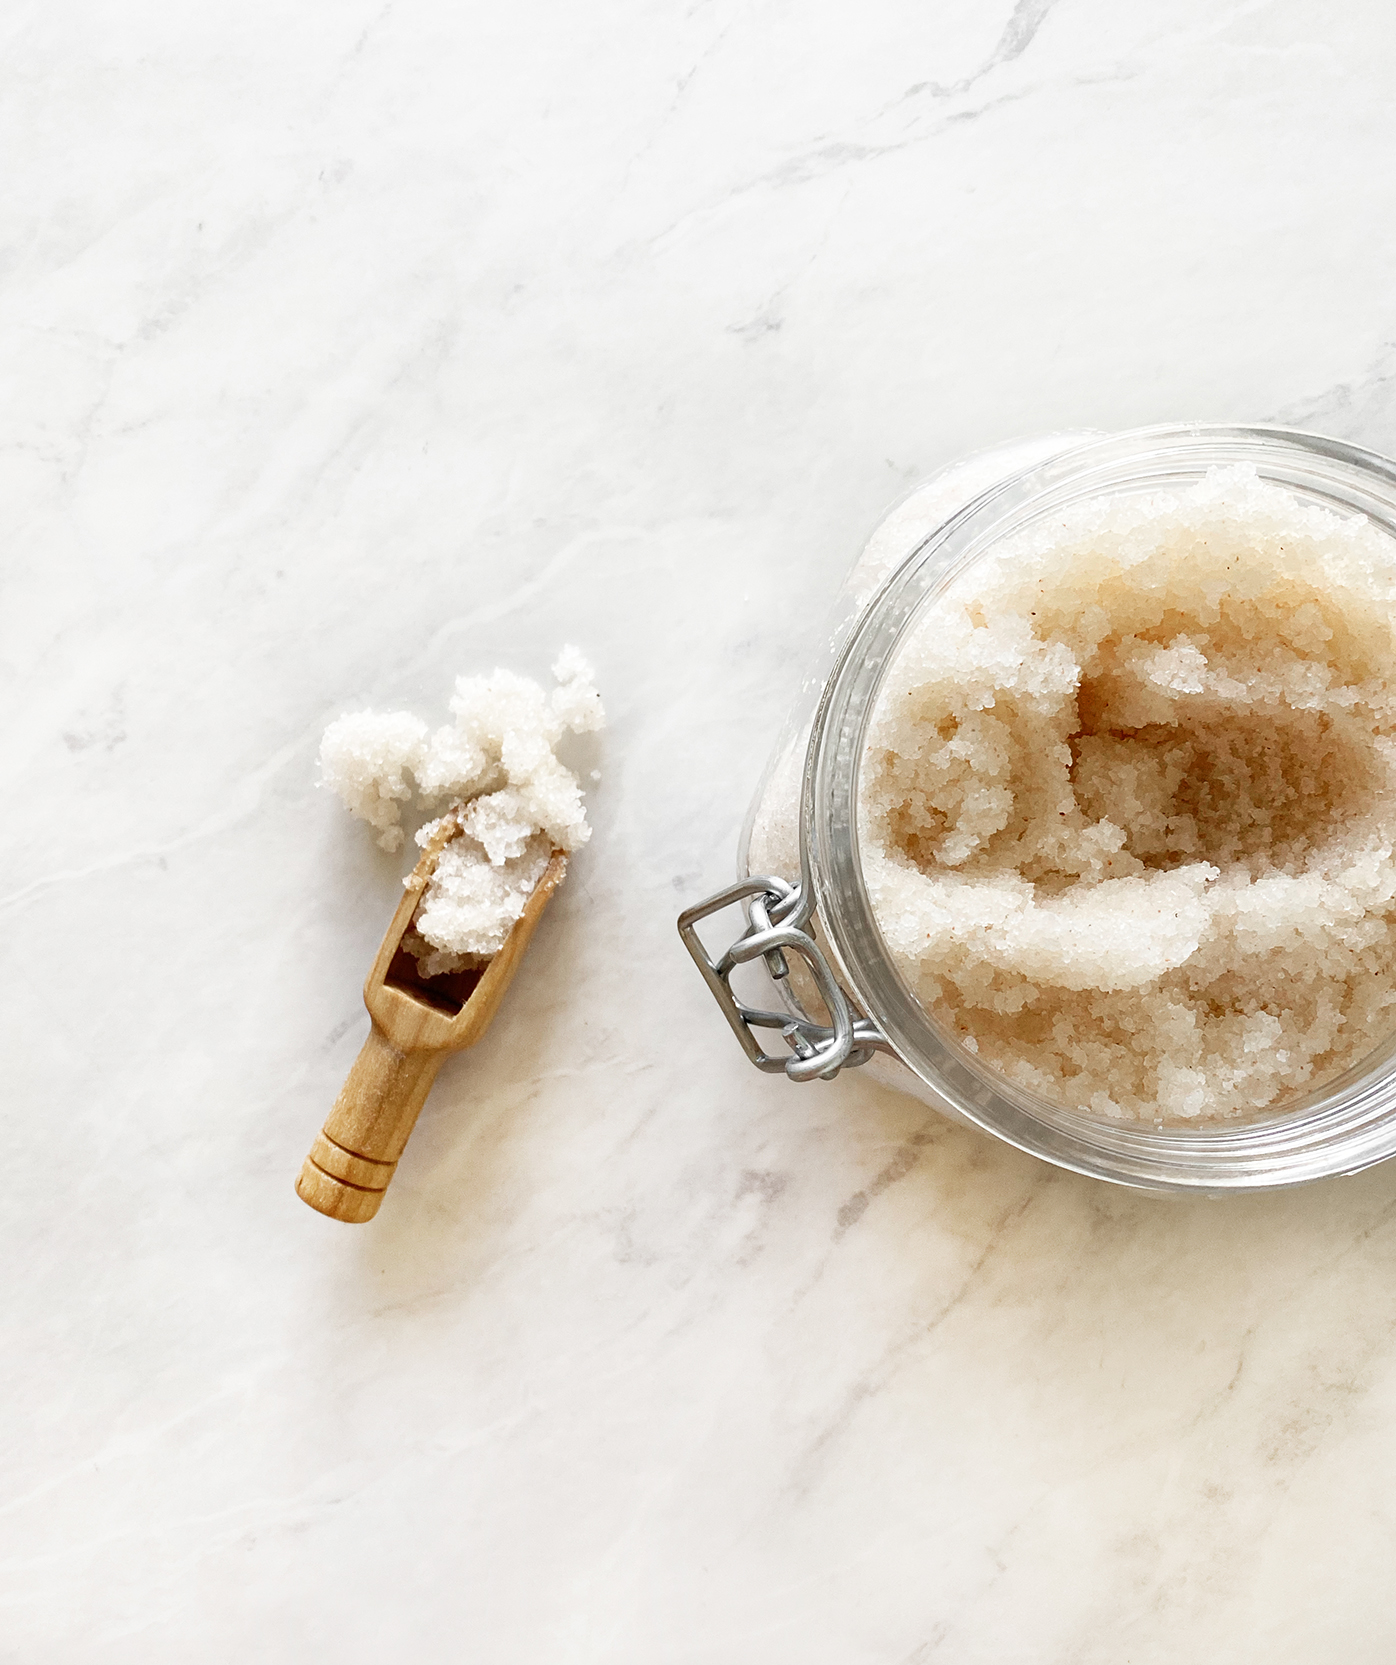 Sharing an all-natural and homemade salt body scrub. So moisturizing, helps detoxify, and gives your skin a deep clean. Catch it now at KaraLayne.com!